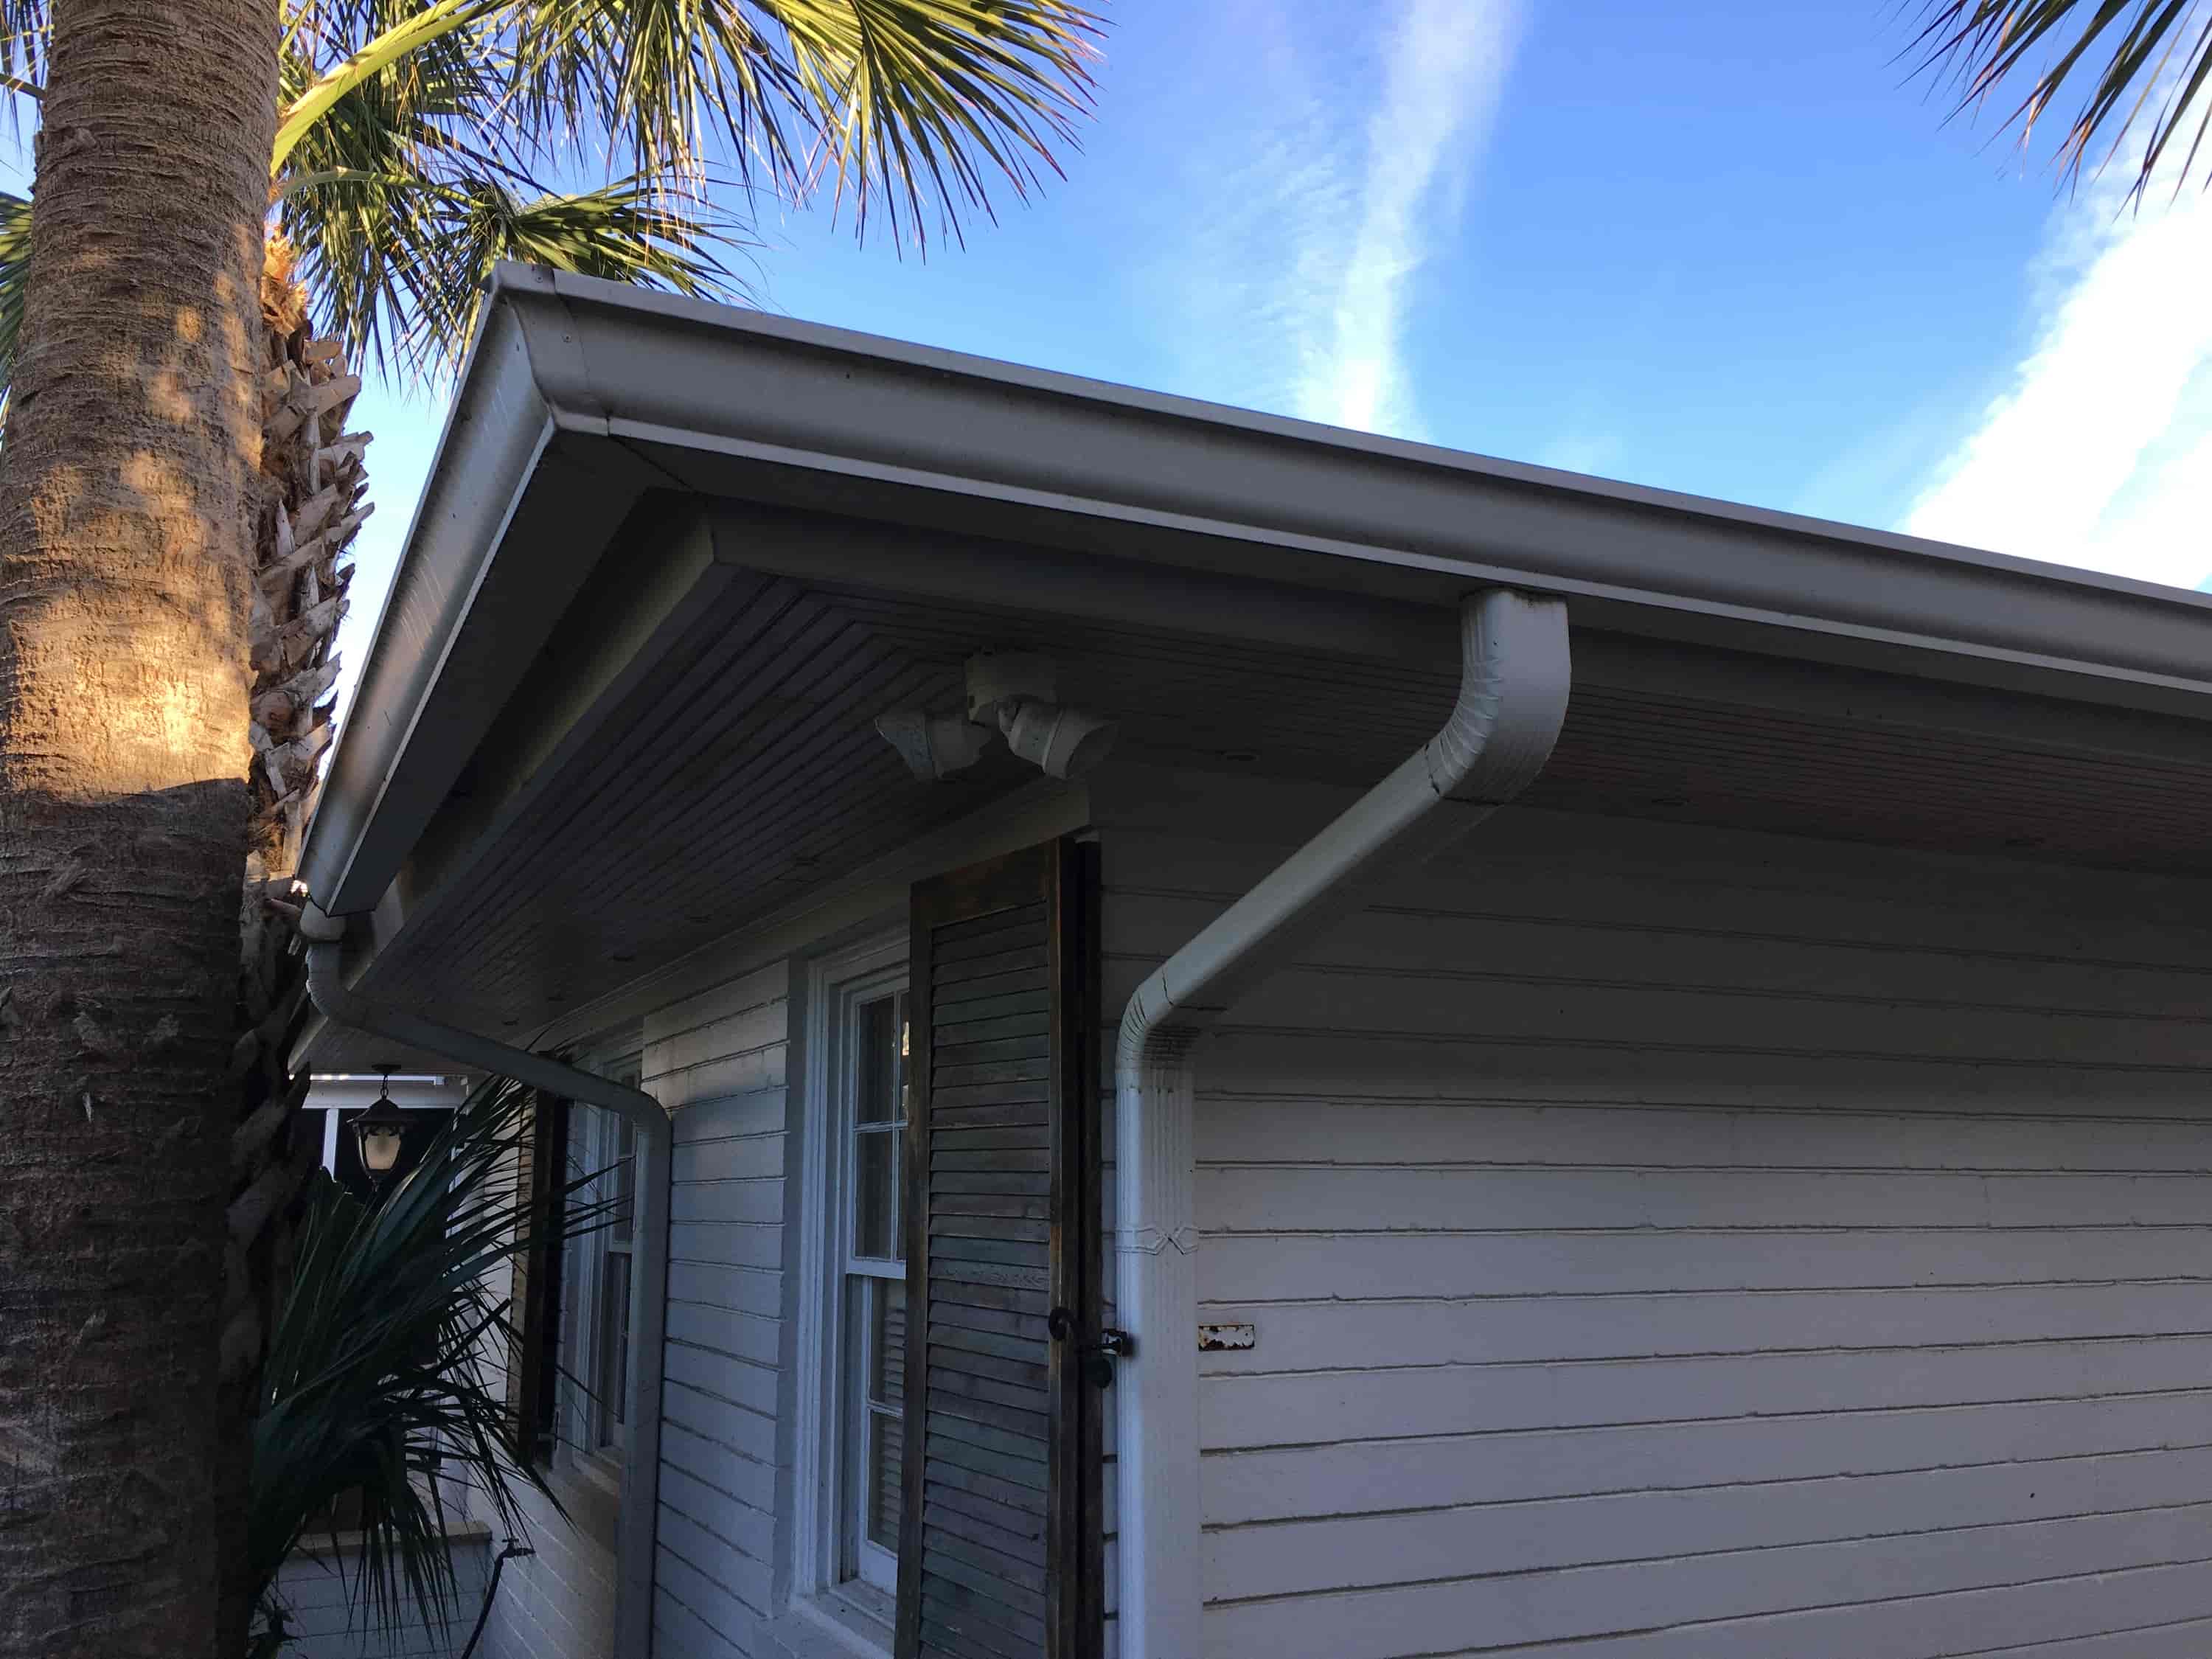 cleaning gutters with gutter guards